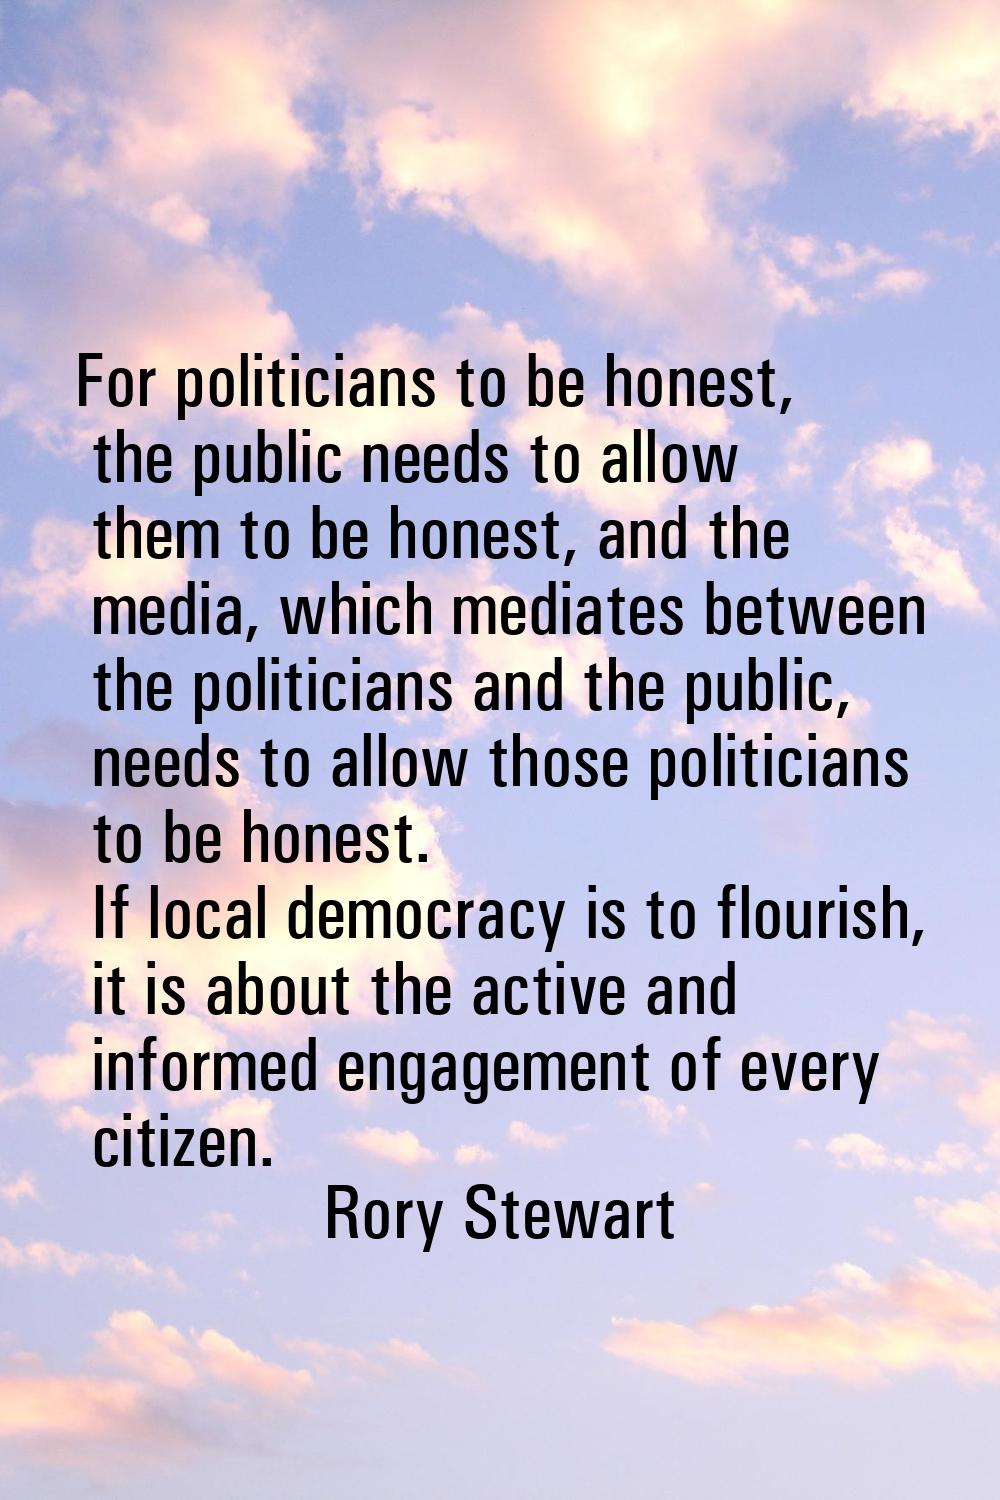 For politicians to be honest, the public needs to allow them to be honest, and the media, which med